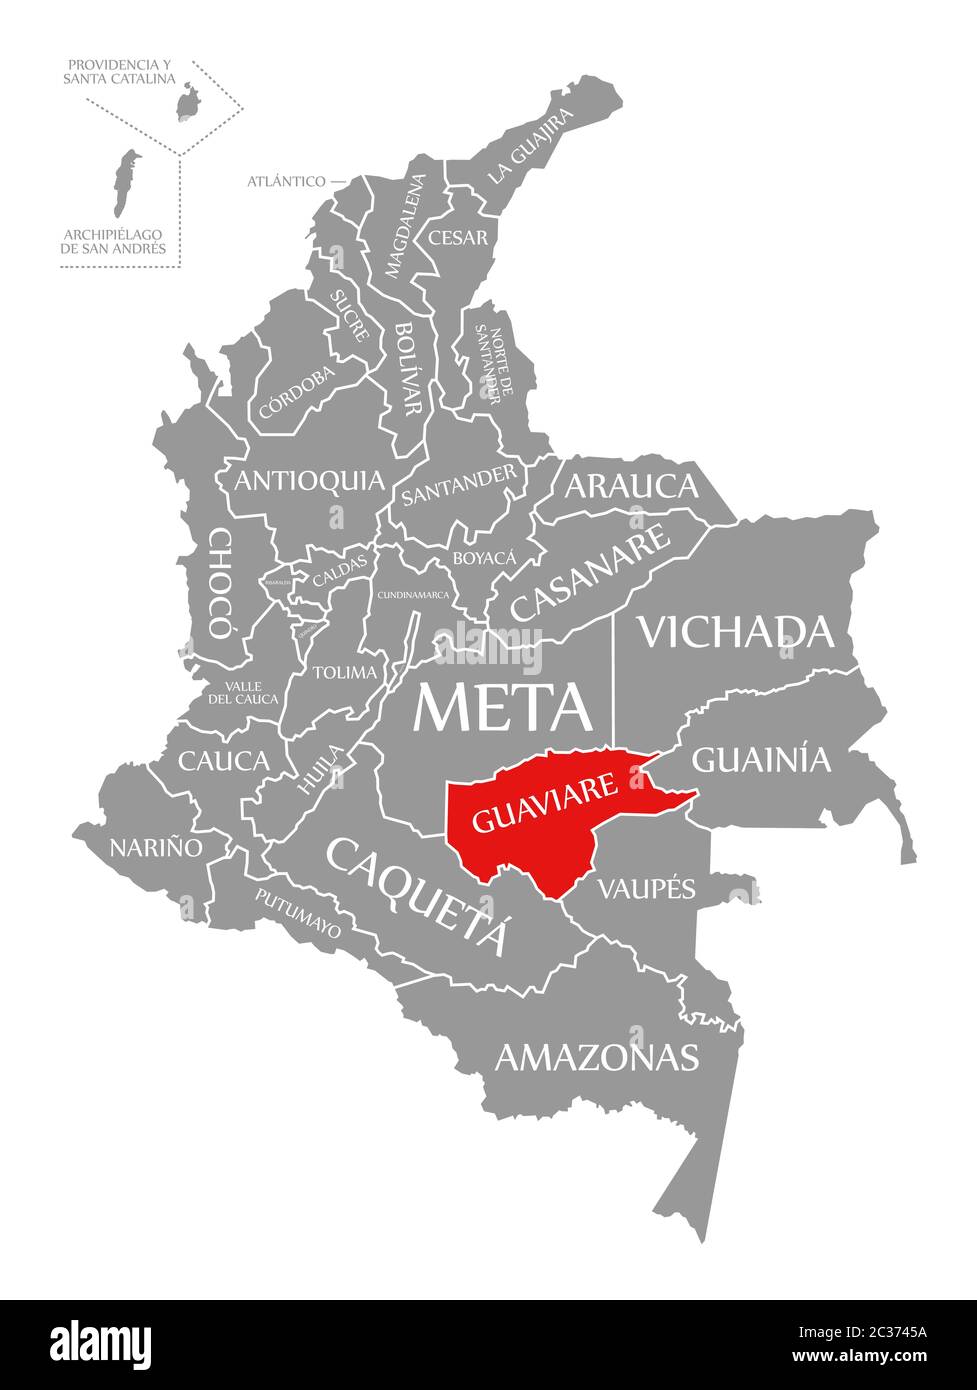 Guaviare red highlighted in map of Colombia Stock Photo